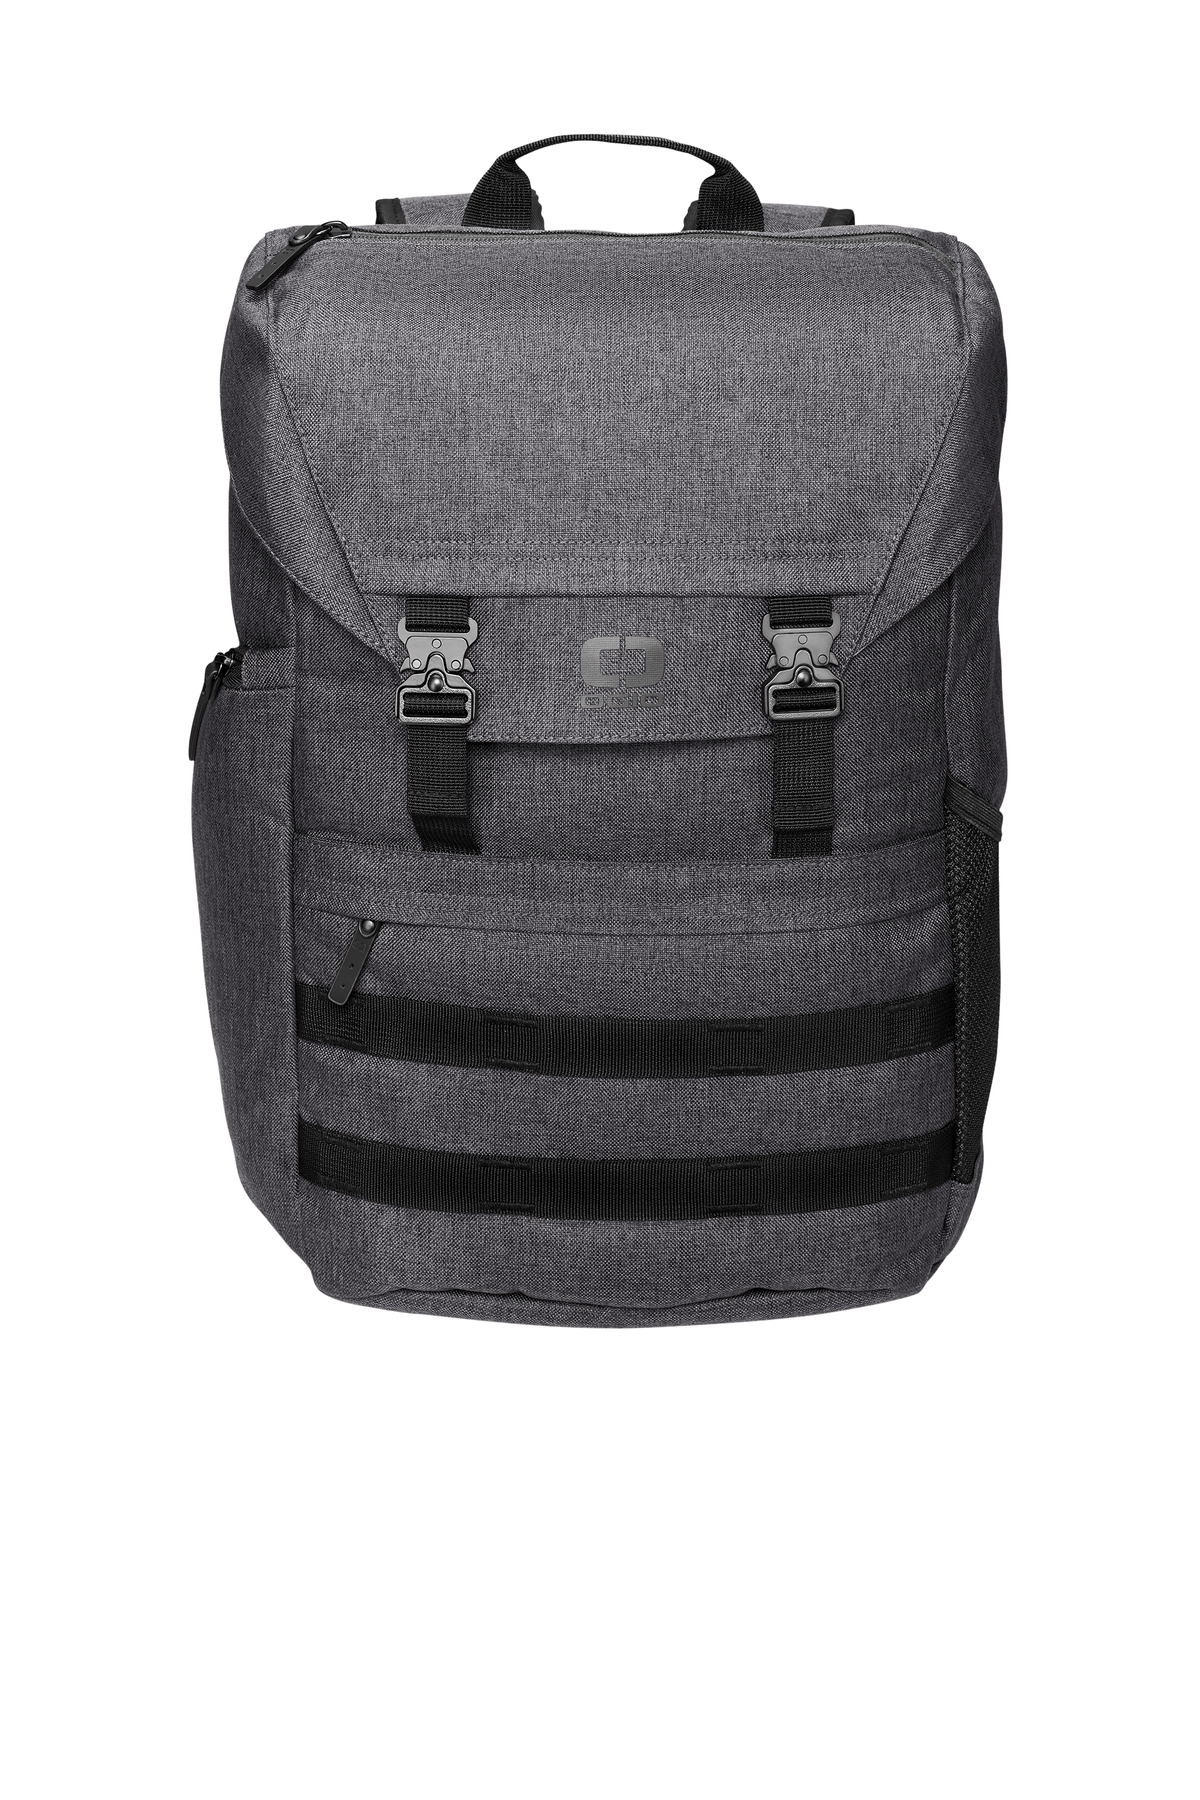 OGIO Command Pack-